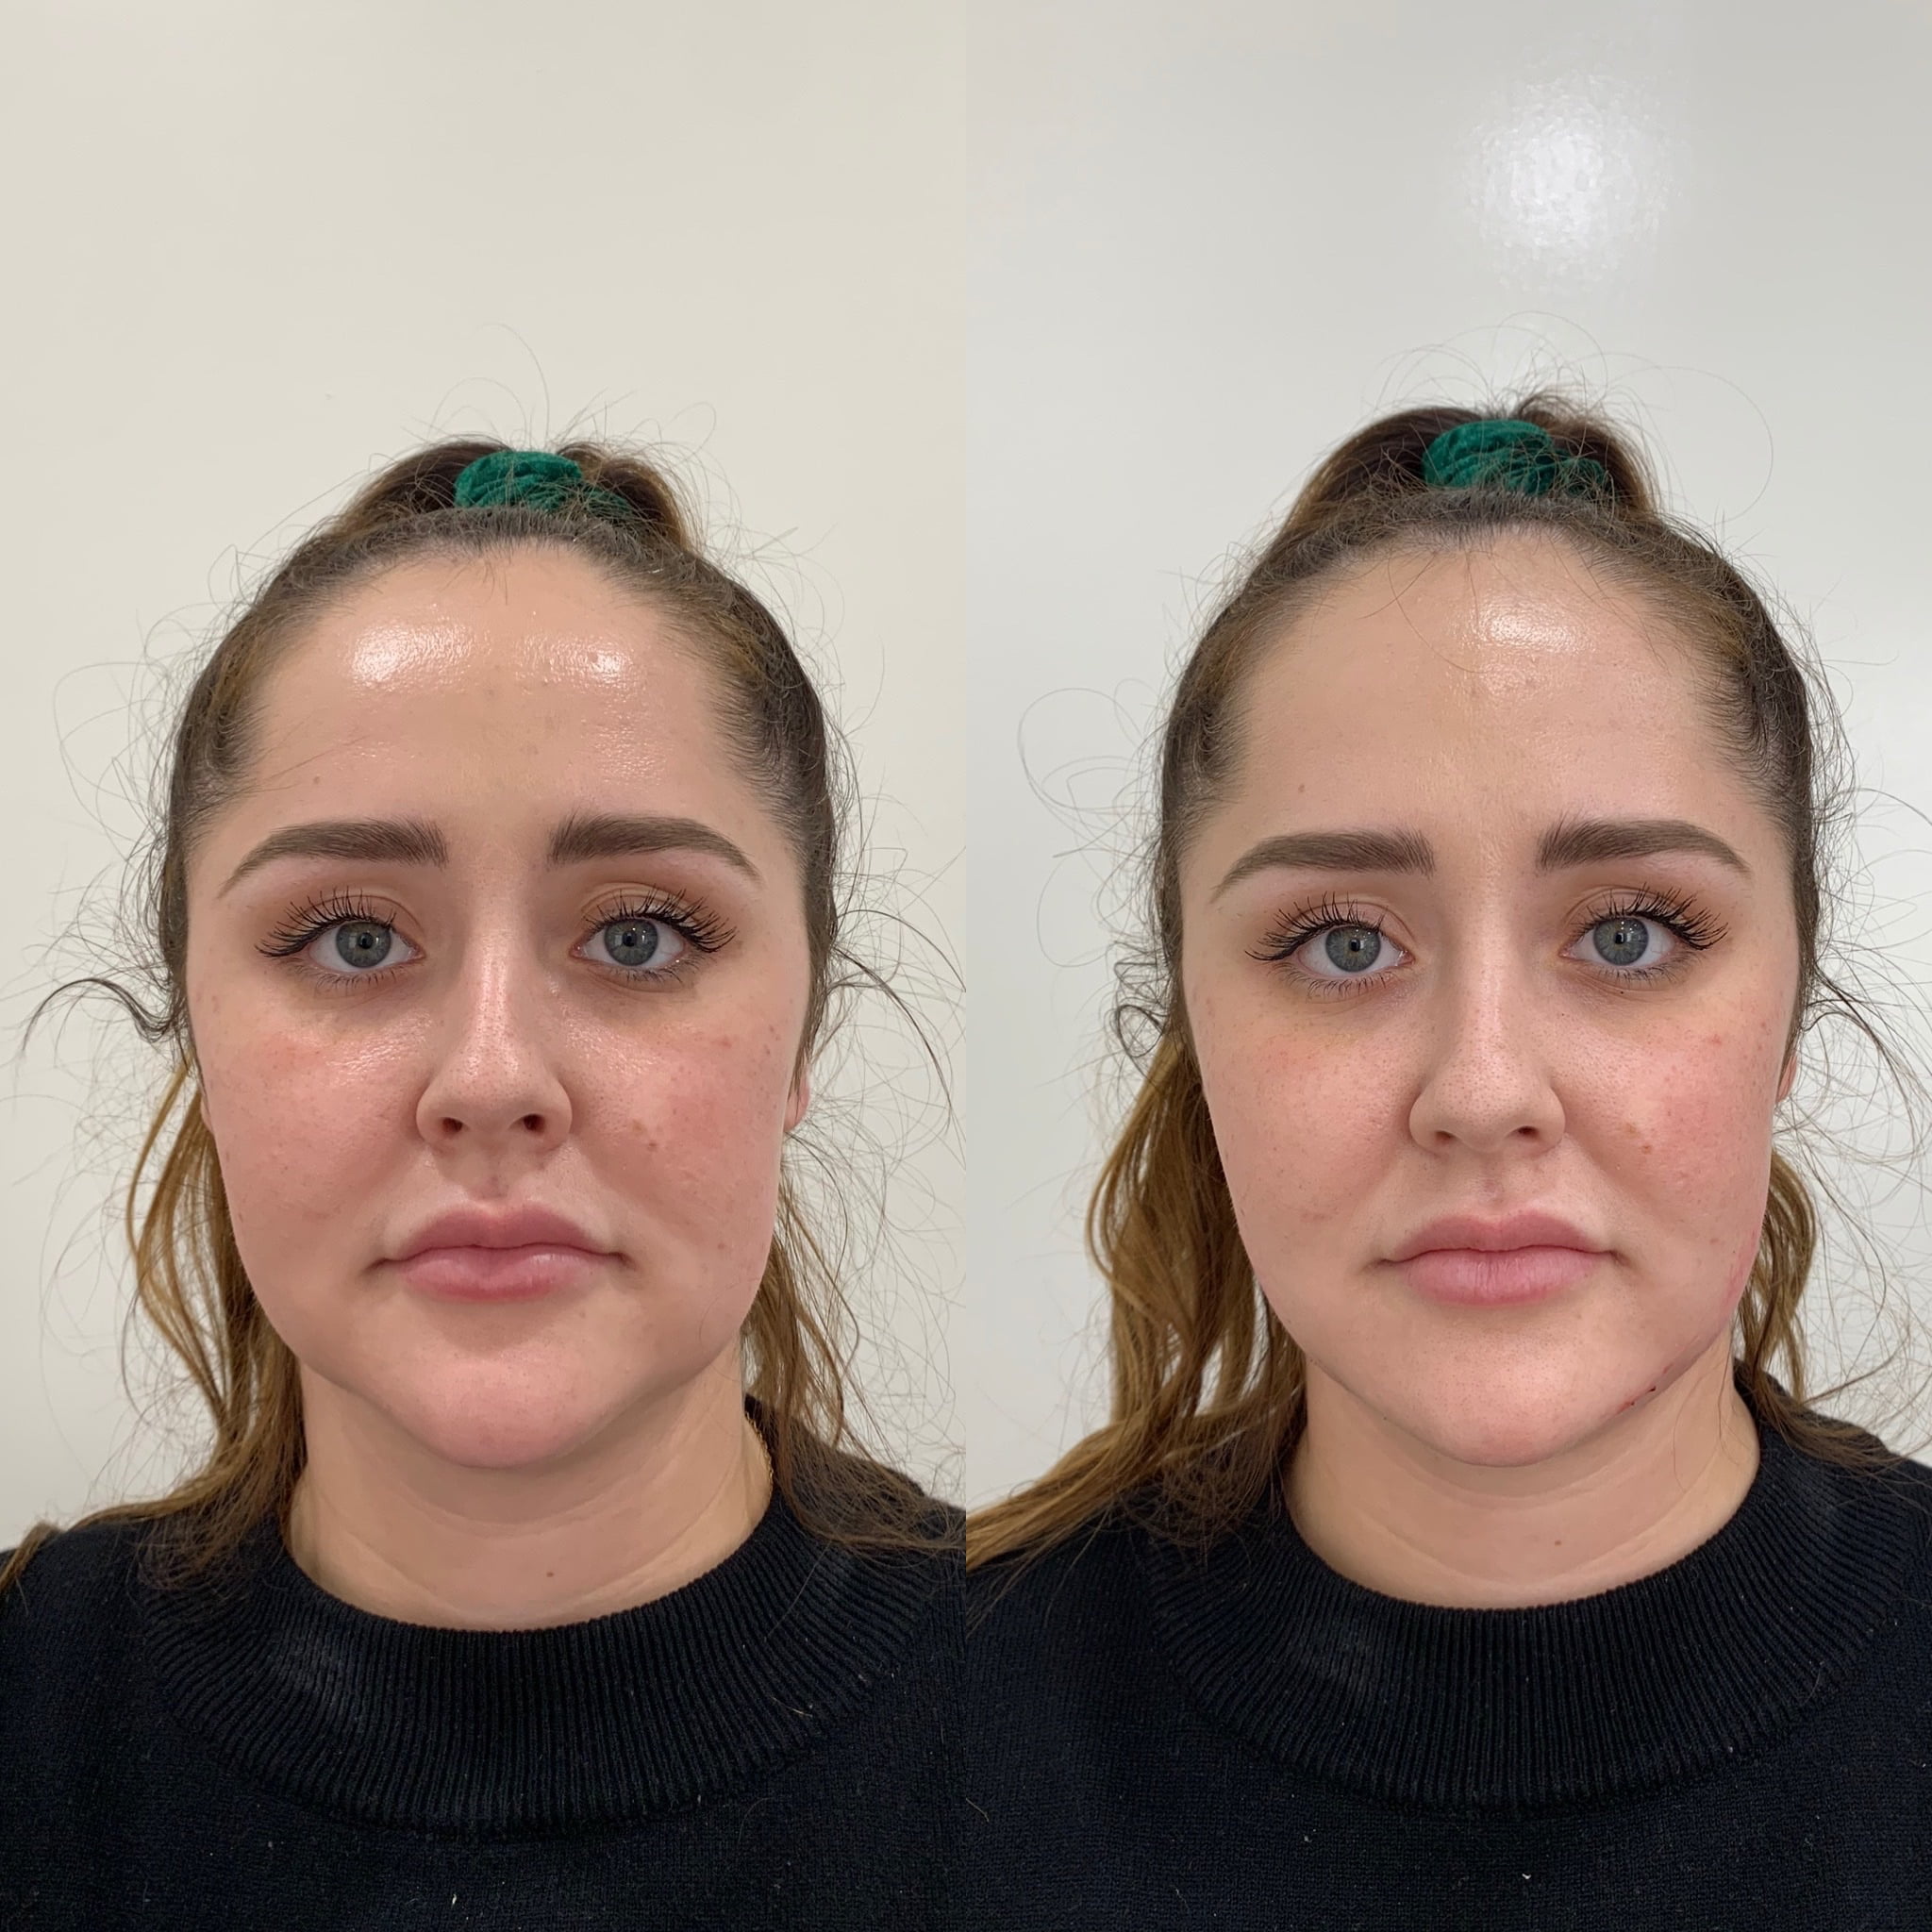 Before and After Fillers Jawline Treatment | Beauty Boost Med Spa in Newport Beach, CA